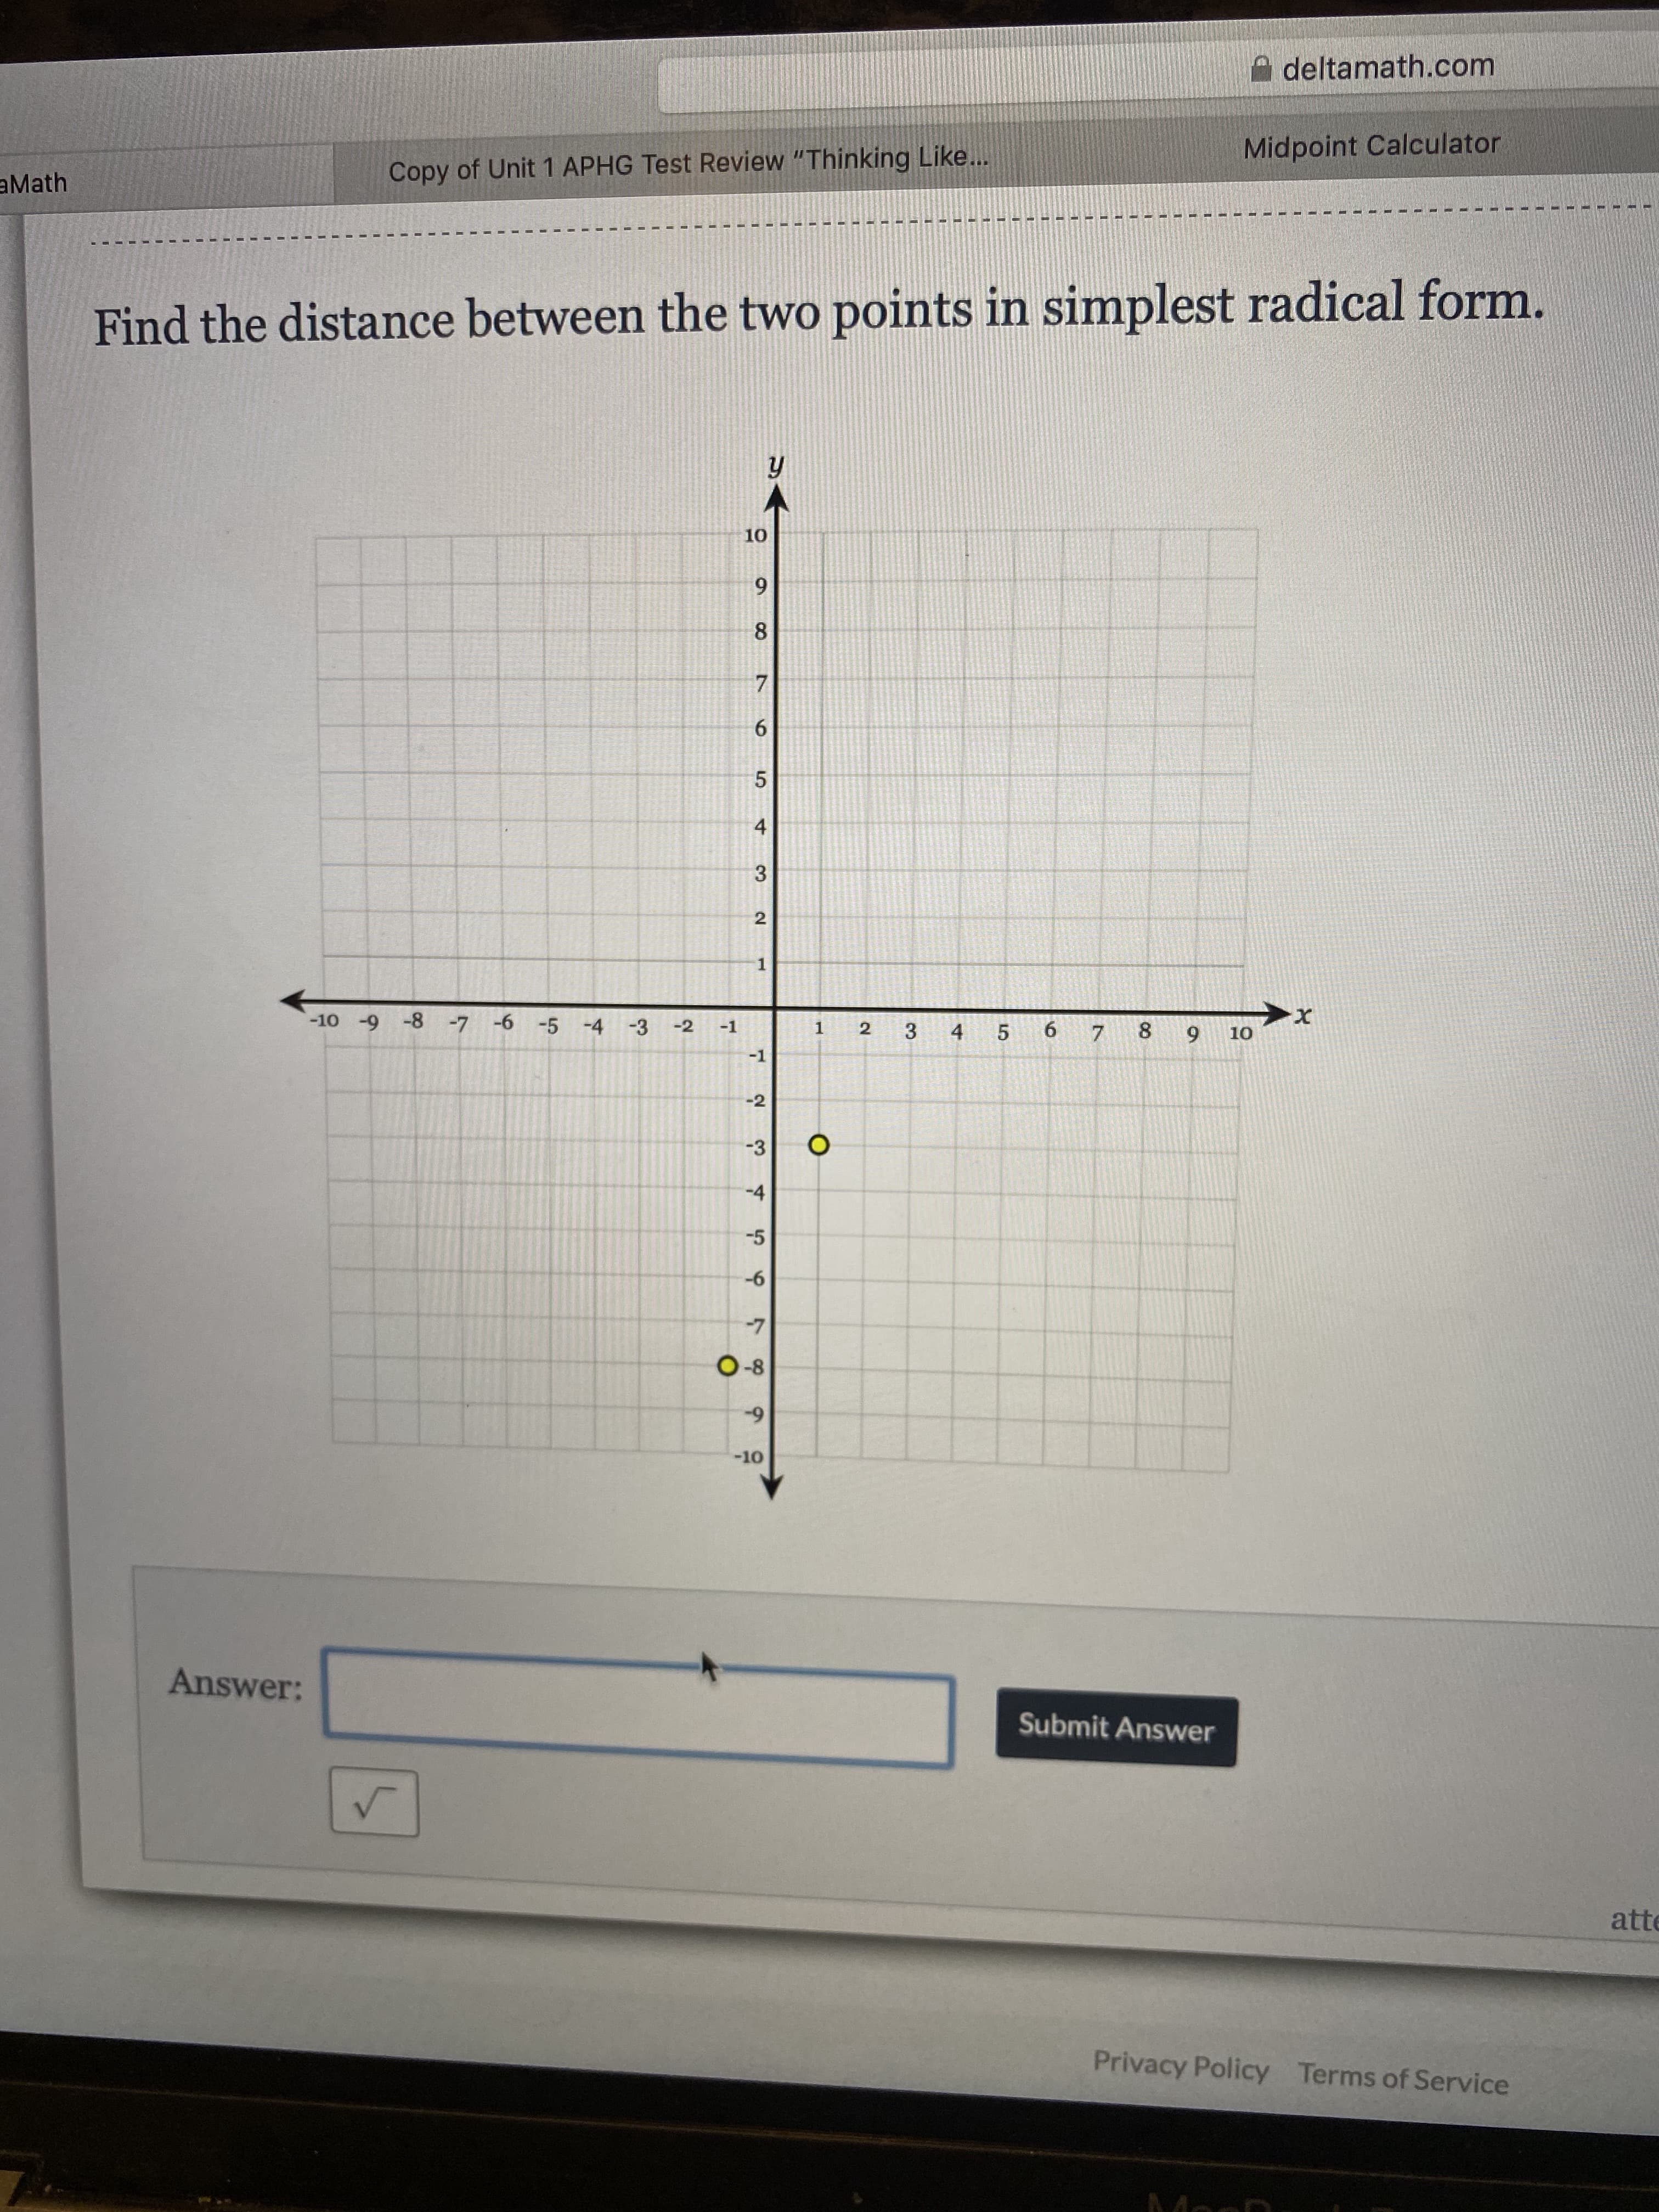 Find the distance between the two points in simplest radical form.
